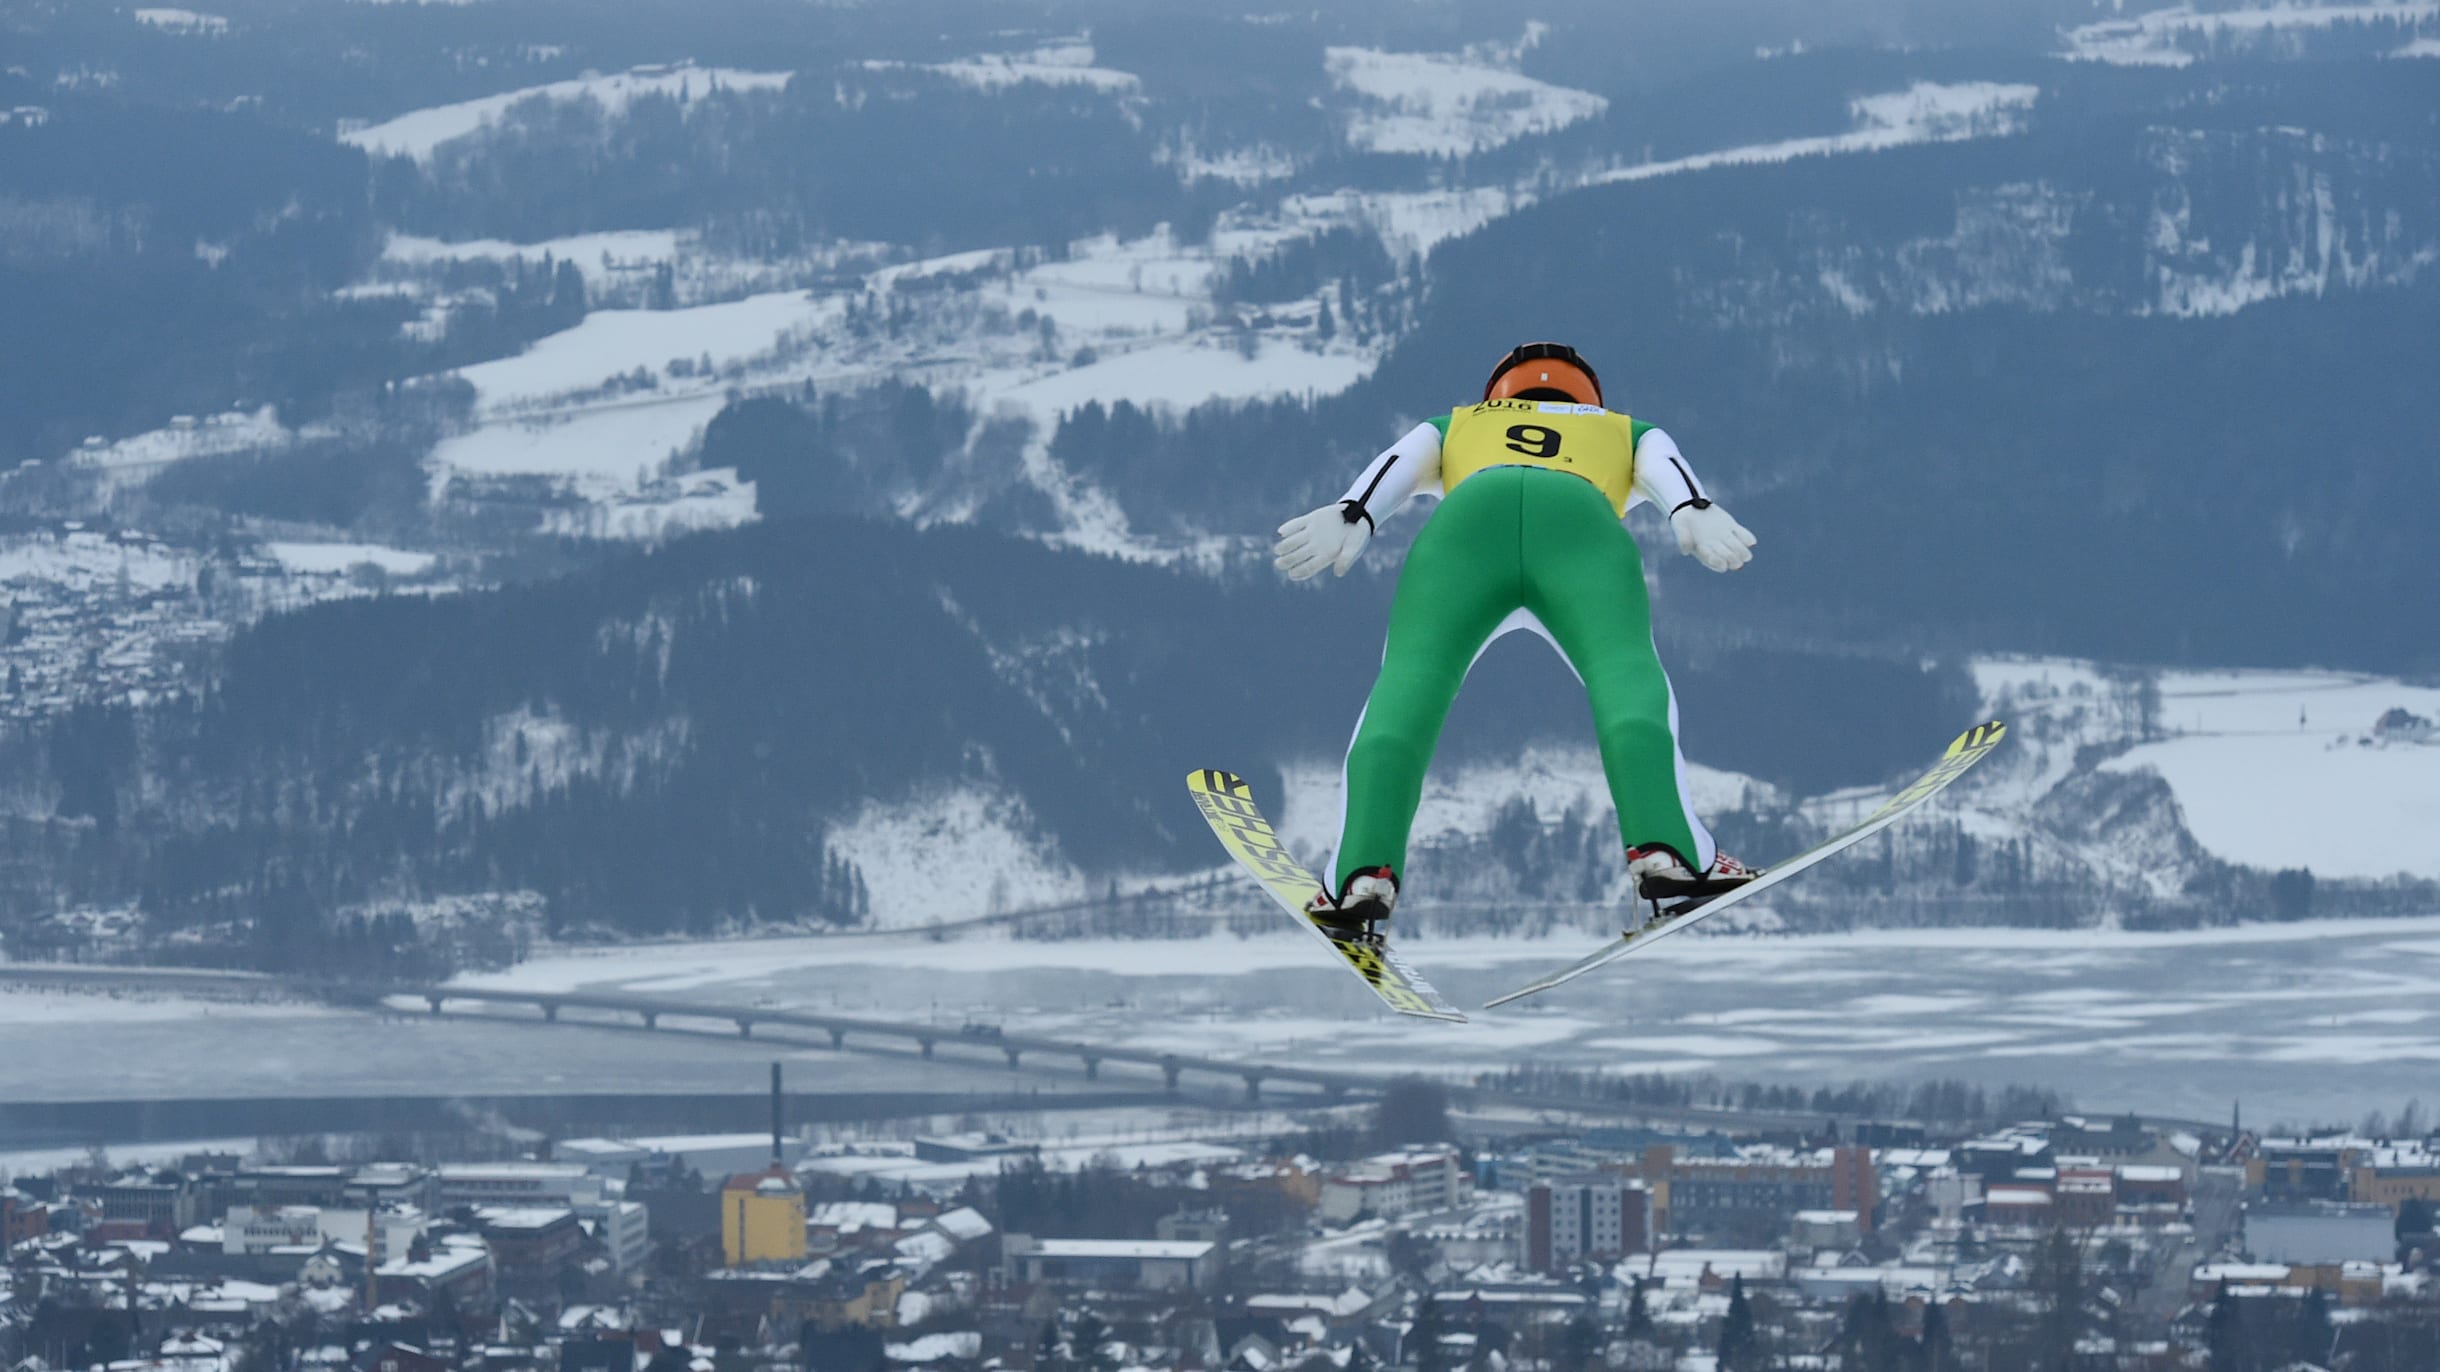 All you need to know about ski jumping at Lausanne 2020